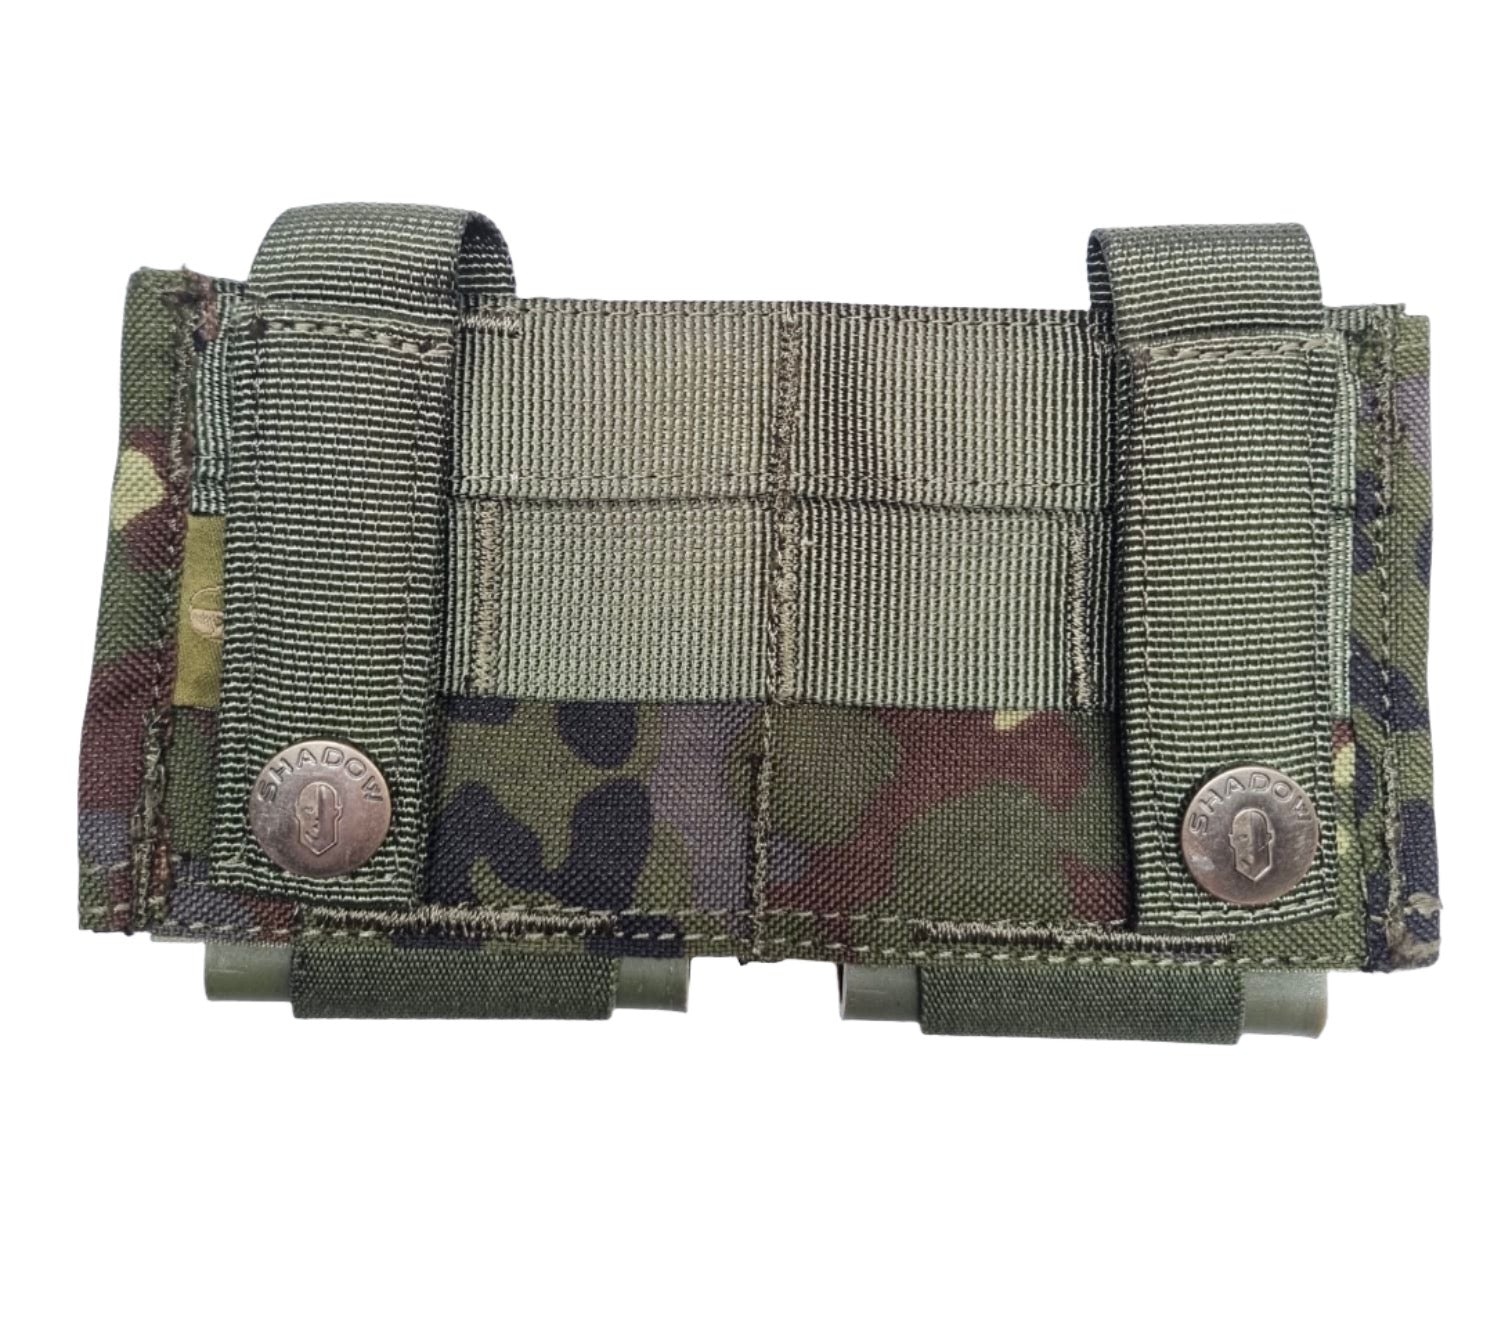 SHE-23032 GRIPTAC DOUBLE M4/M16  MAG POUCH FLECTARN BACKSDIE